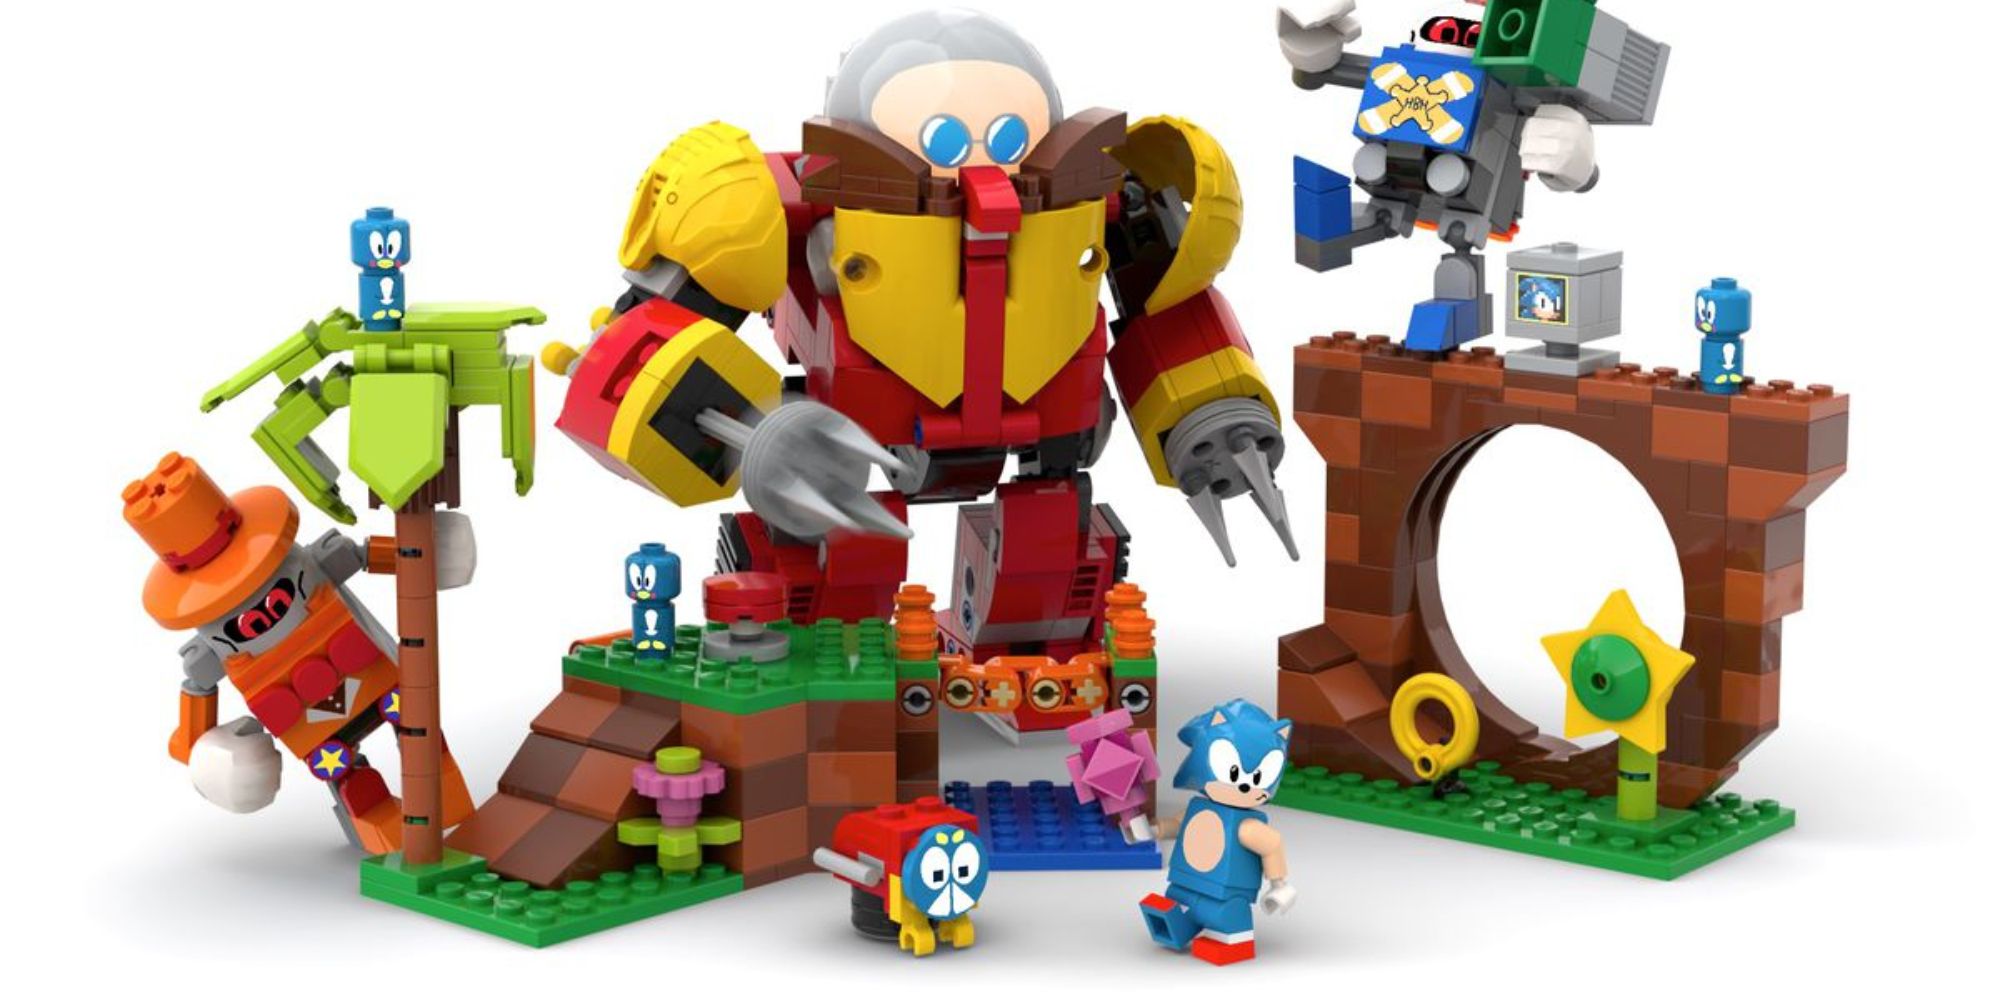 Sonic and various enemies and levels in Lego form